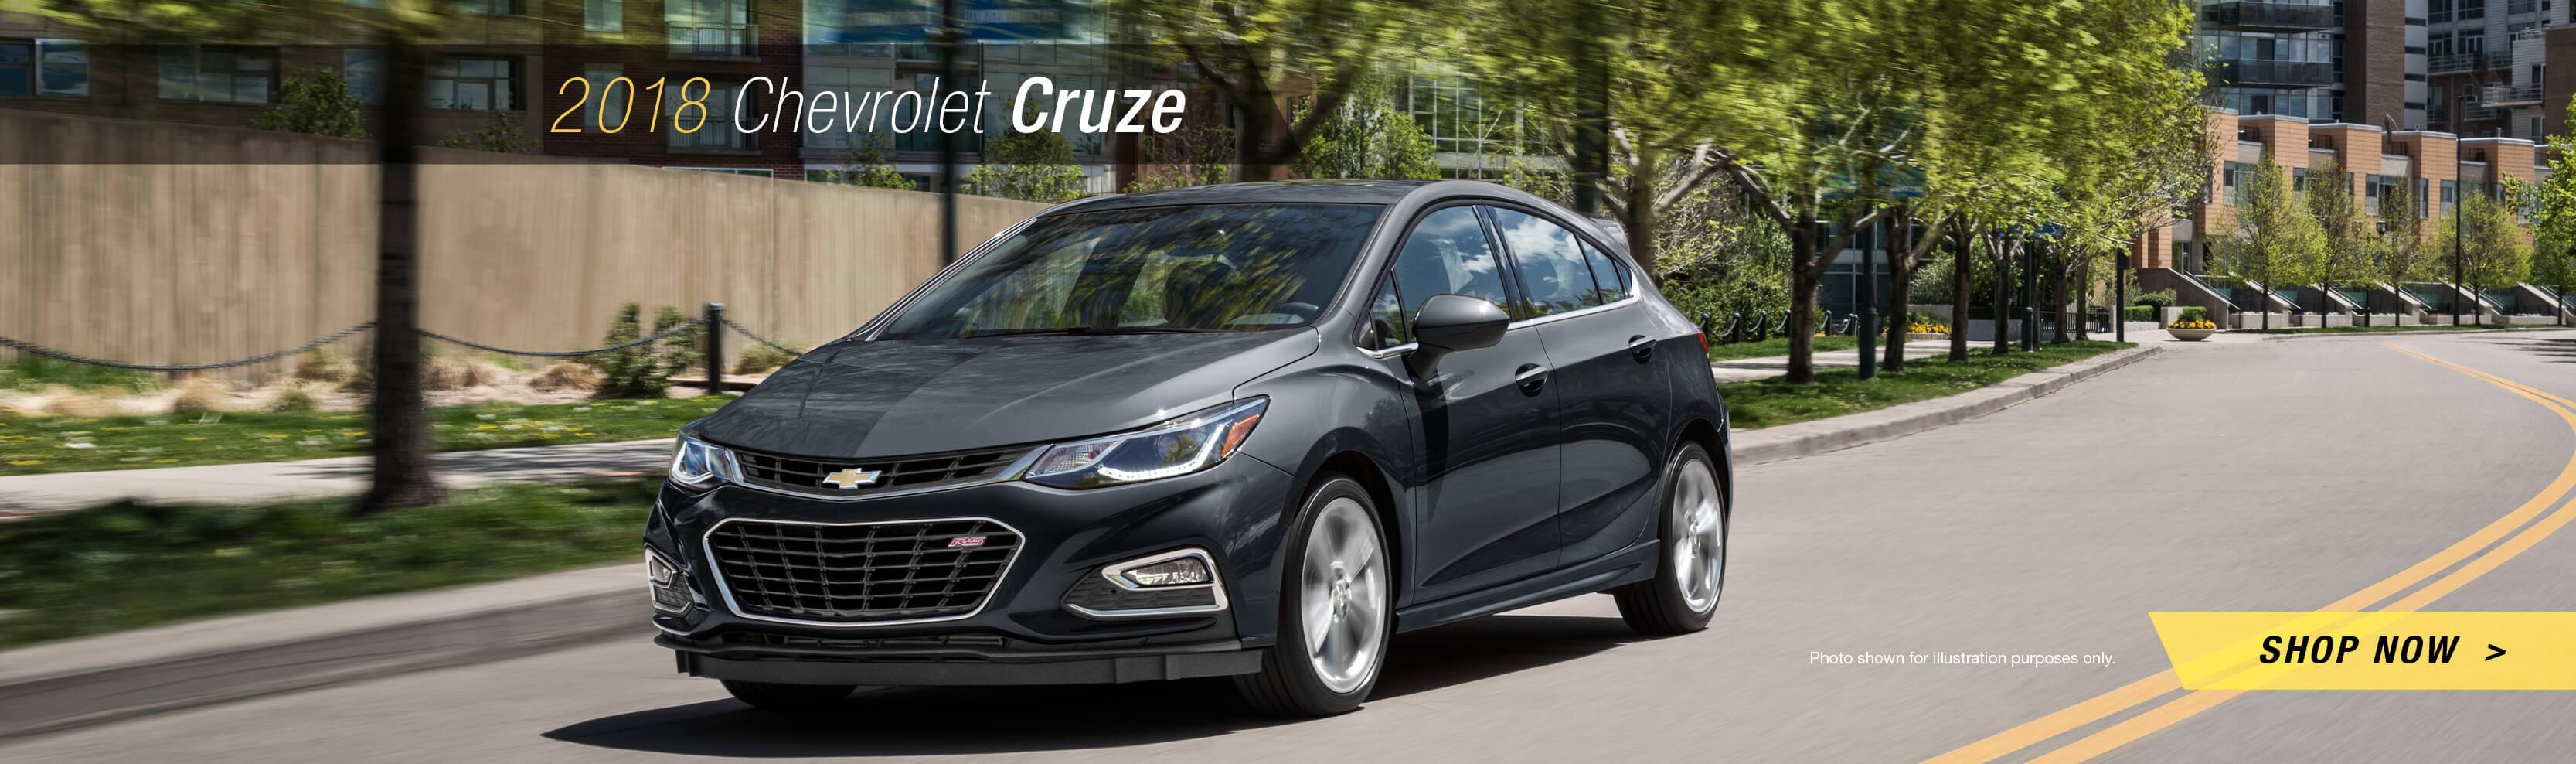 New 2018 Chevrolet Cruze - View Inventory